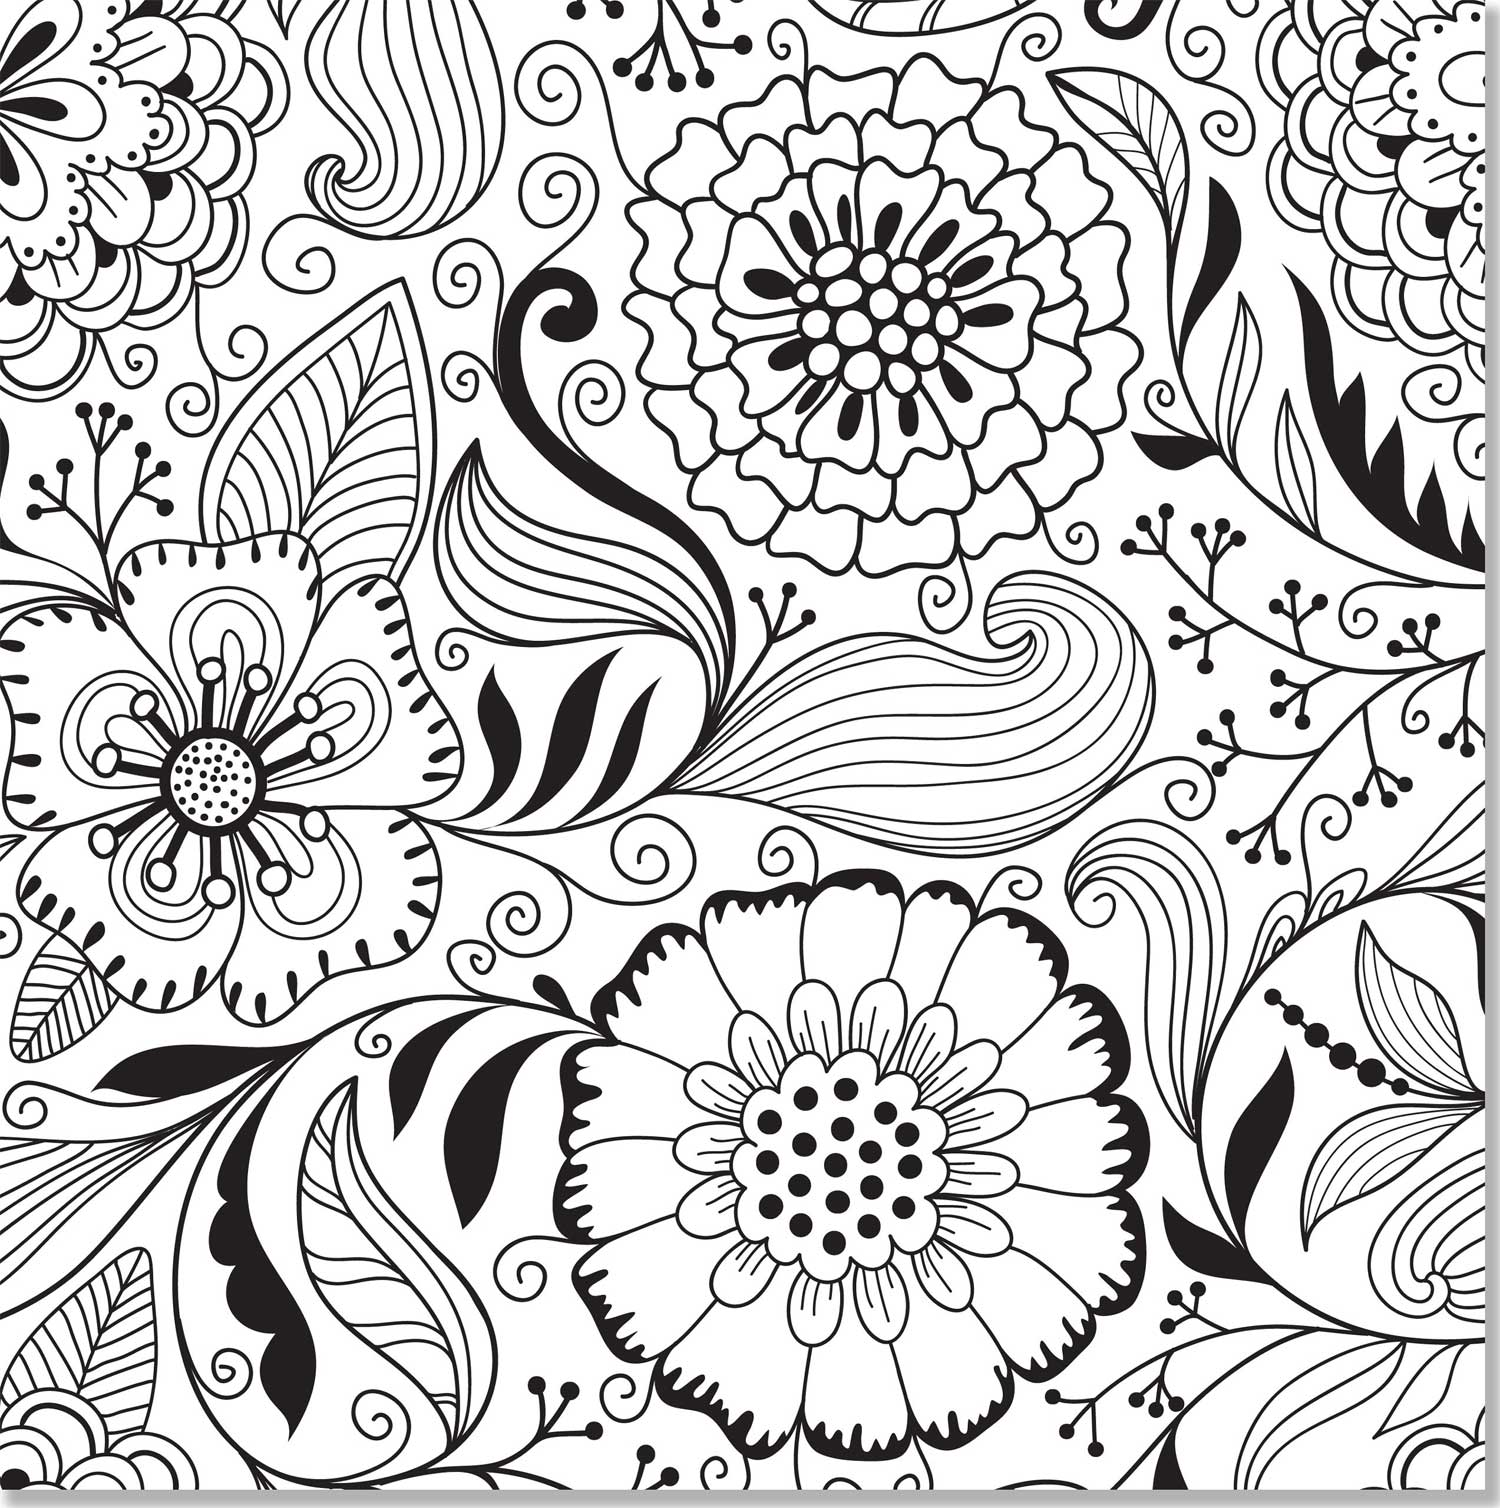 Free Coloring Pages For Adults To Print Image 6 - VoteForVerde.com